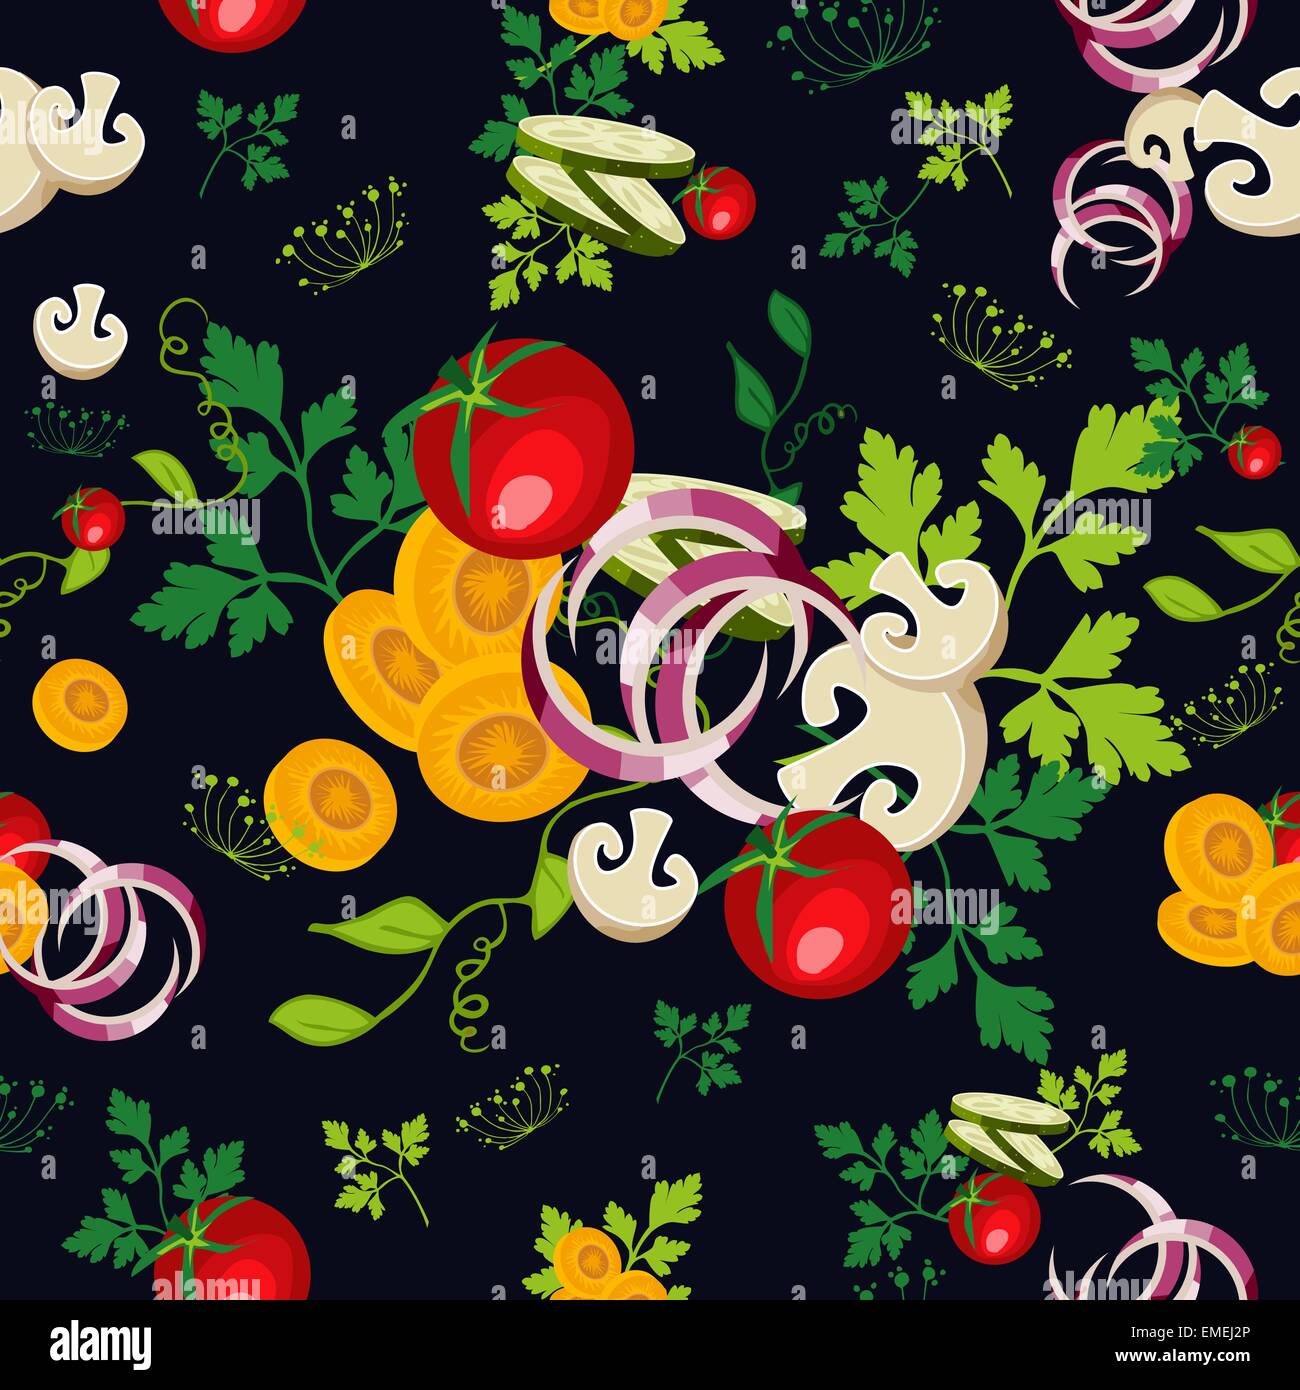 Organic vegetables seamless pattern background Stock Vector